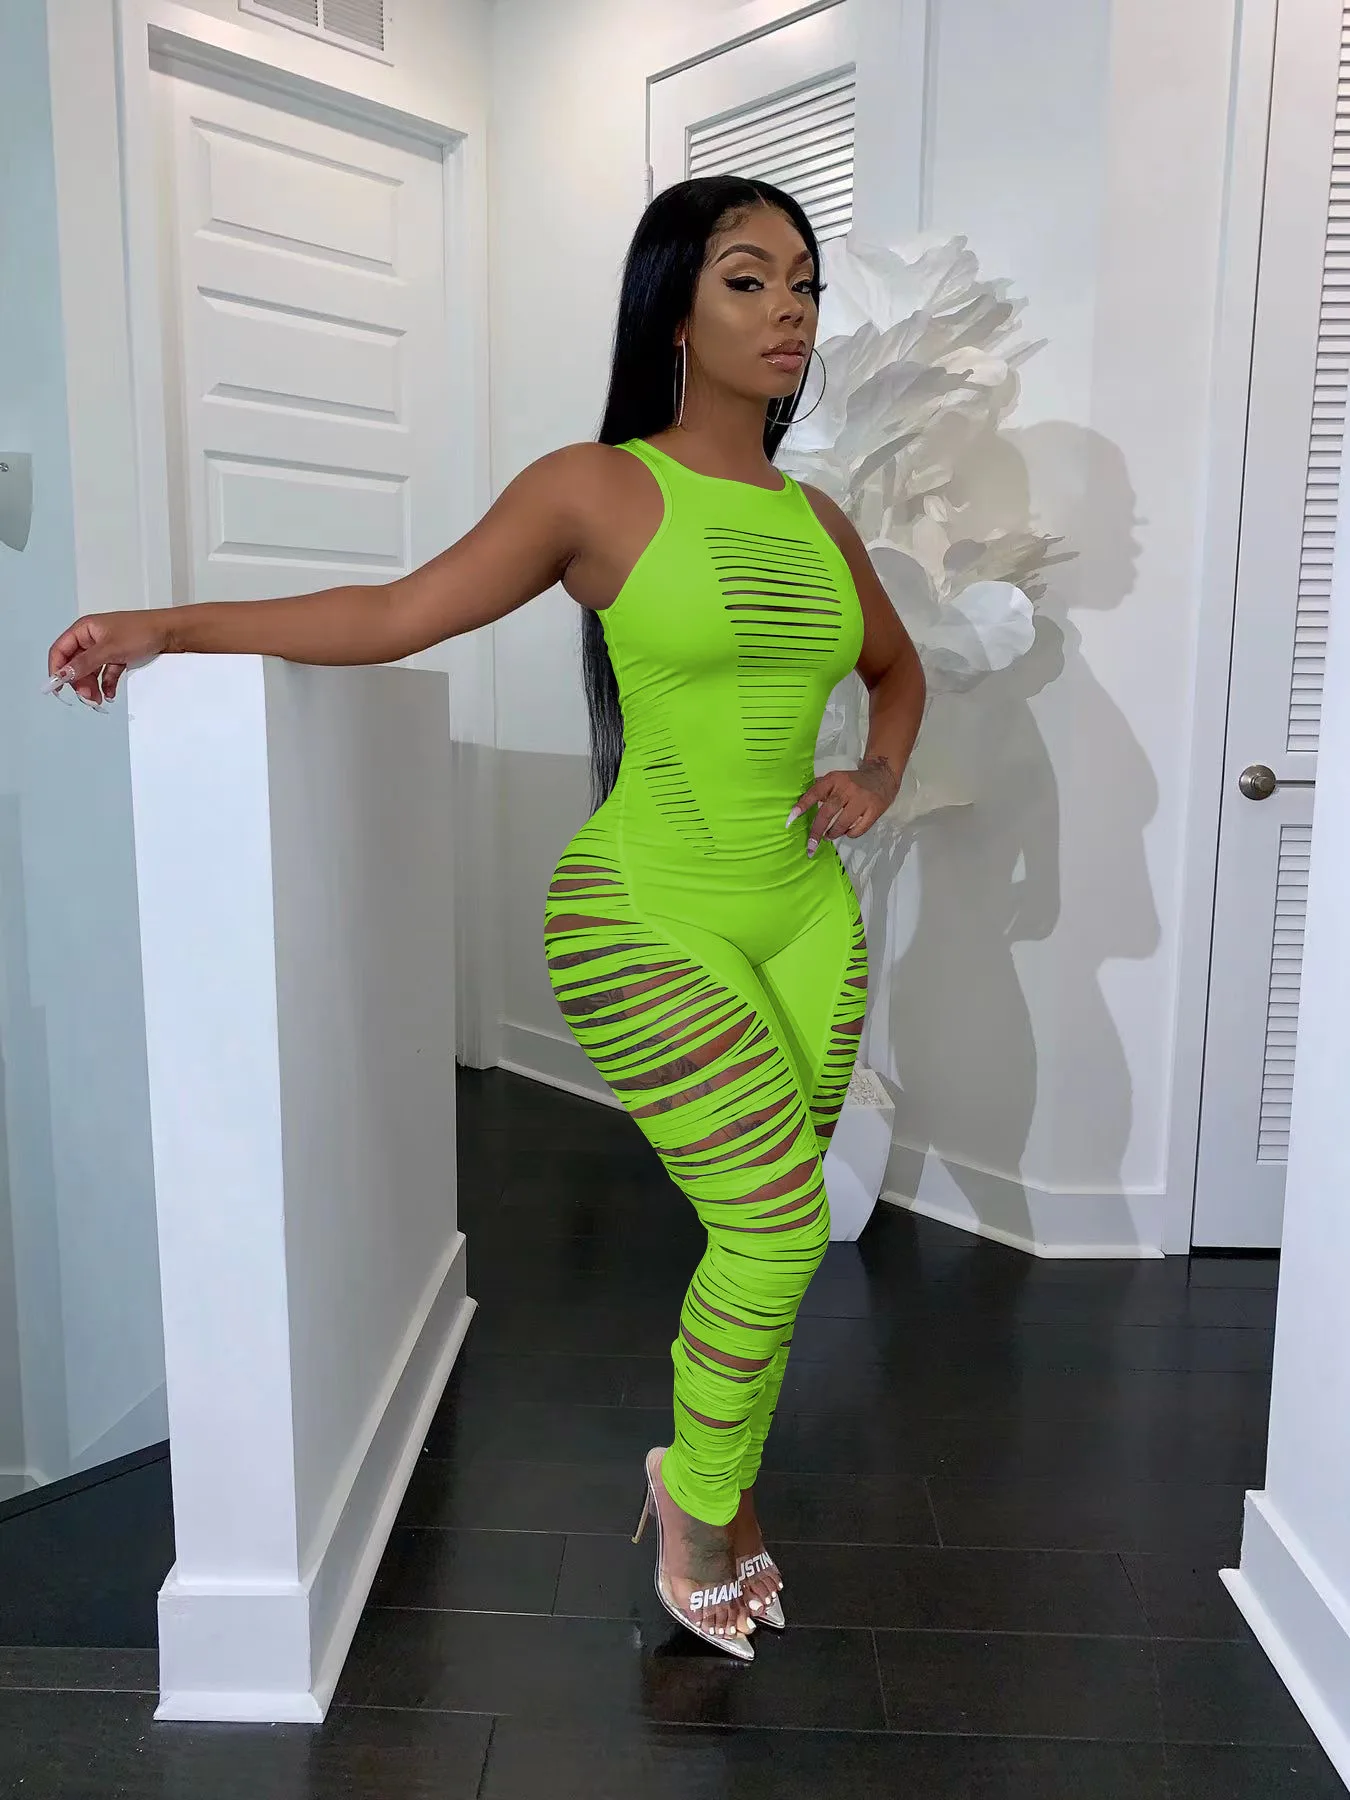 Hole Jumpsuit Women Summer 2022 Sexy Cut Out Sleeveless Cut Out See Through Leggings Club Romper Sport One Piece Overalls Outfit